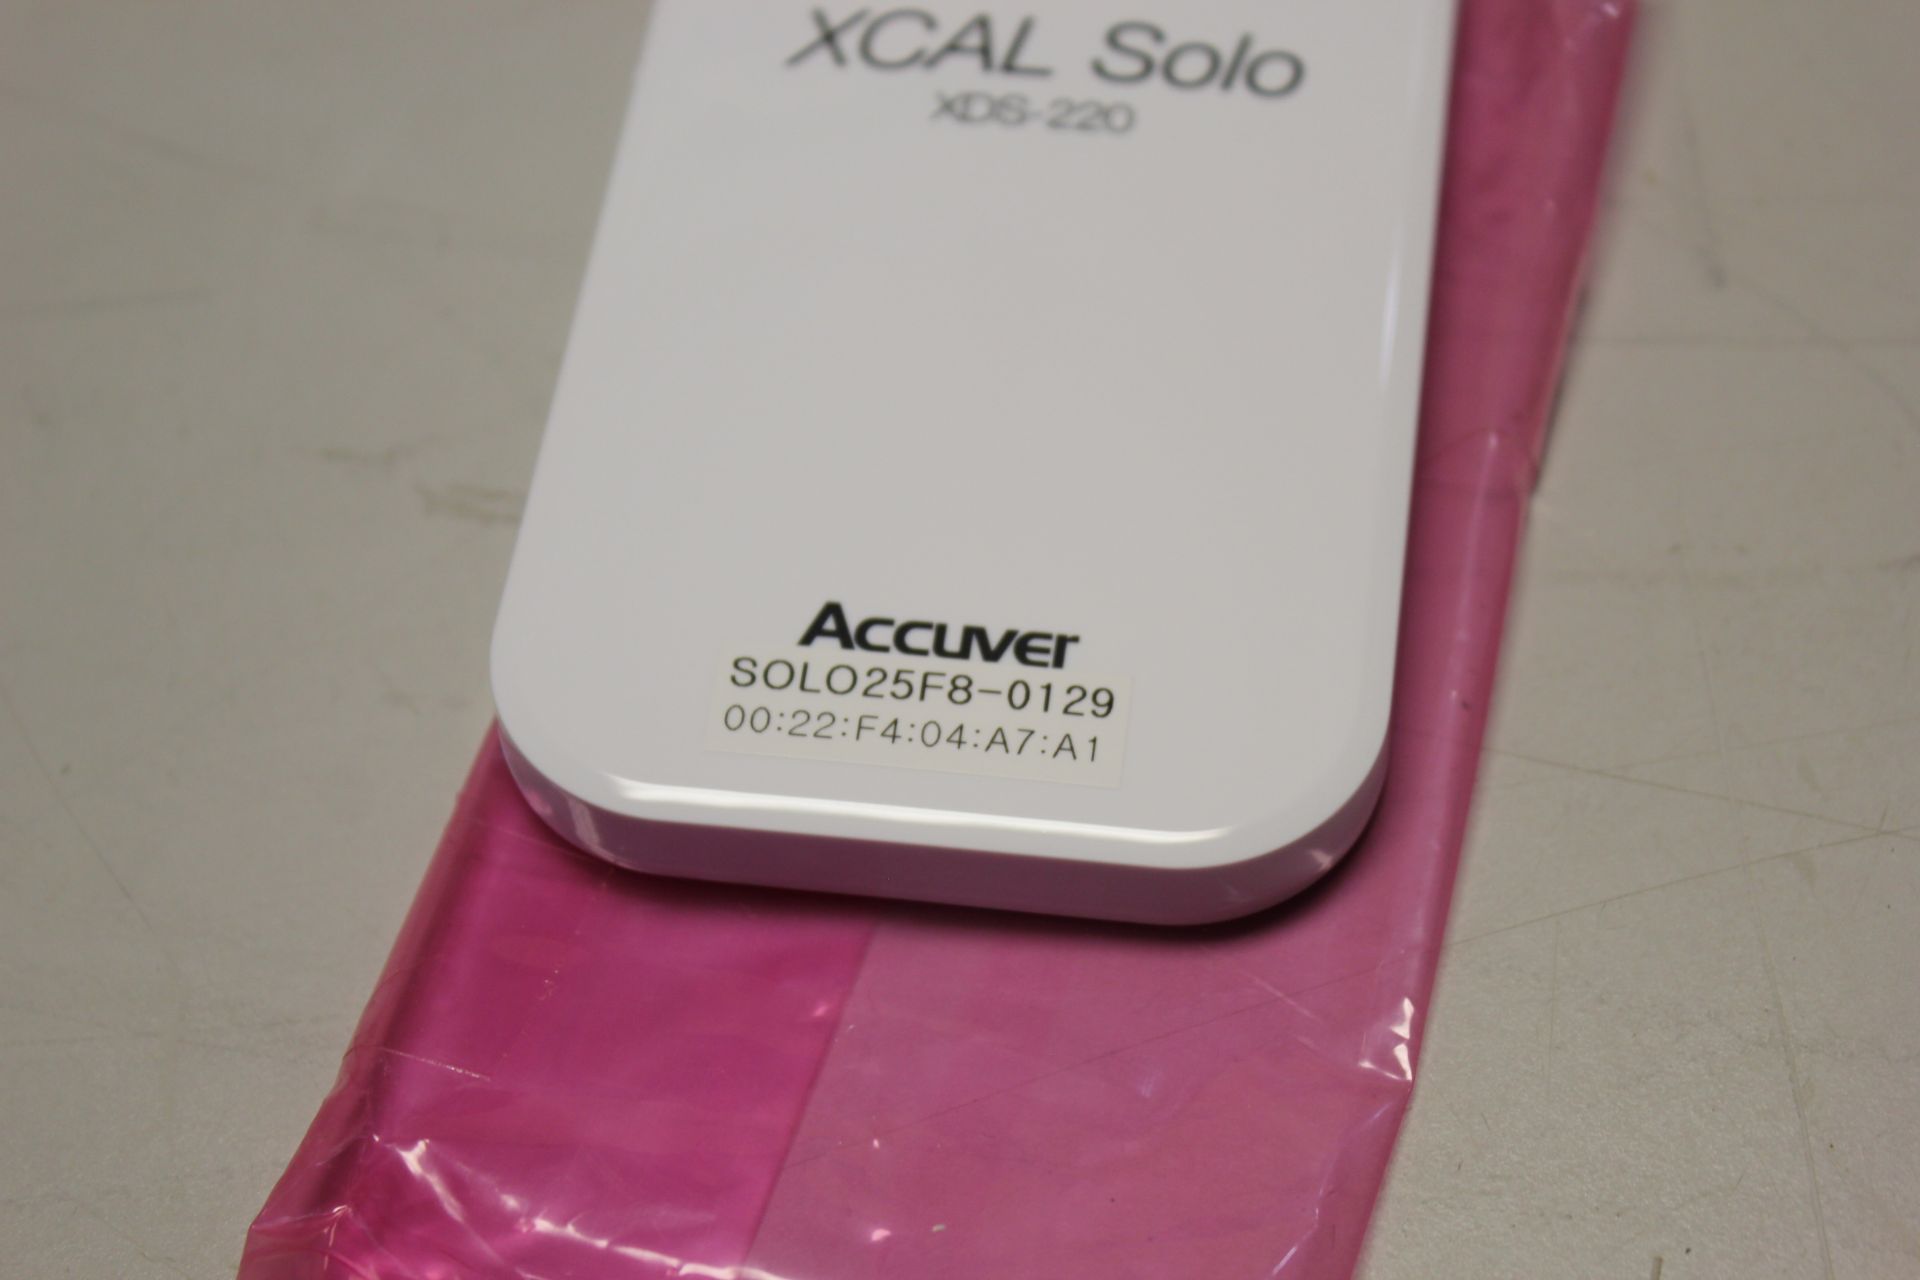 ACCUVER XCAL SOLO SMARTPHONE HANDHELD AIR INTERFACE MEASUREMENT TOOL - Image 11 of 14